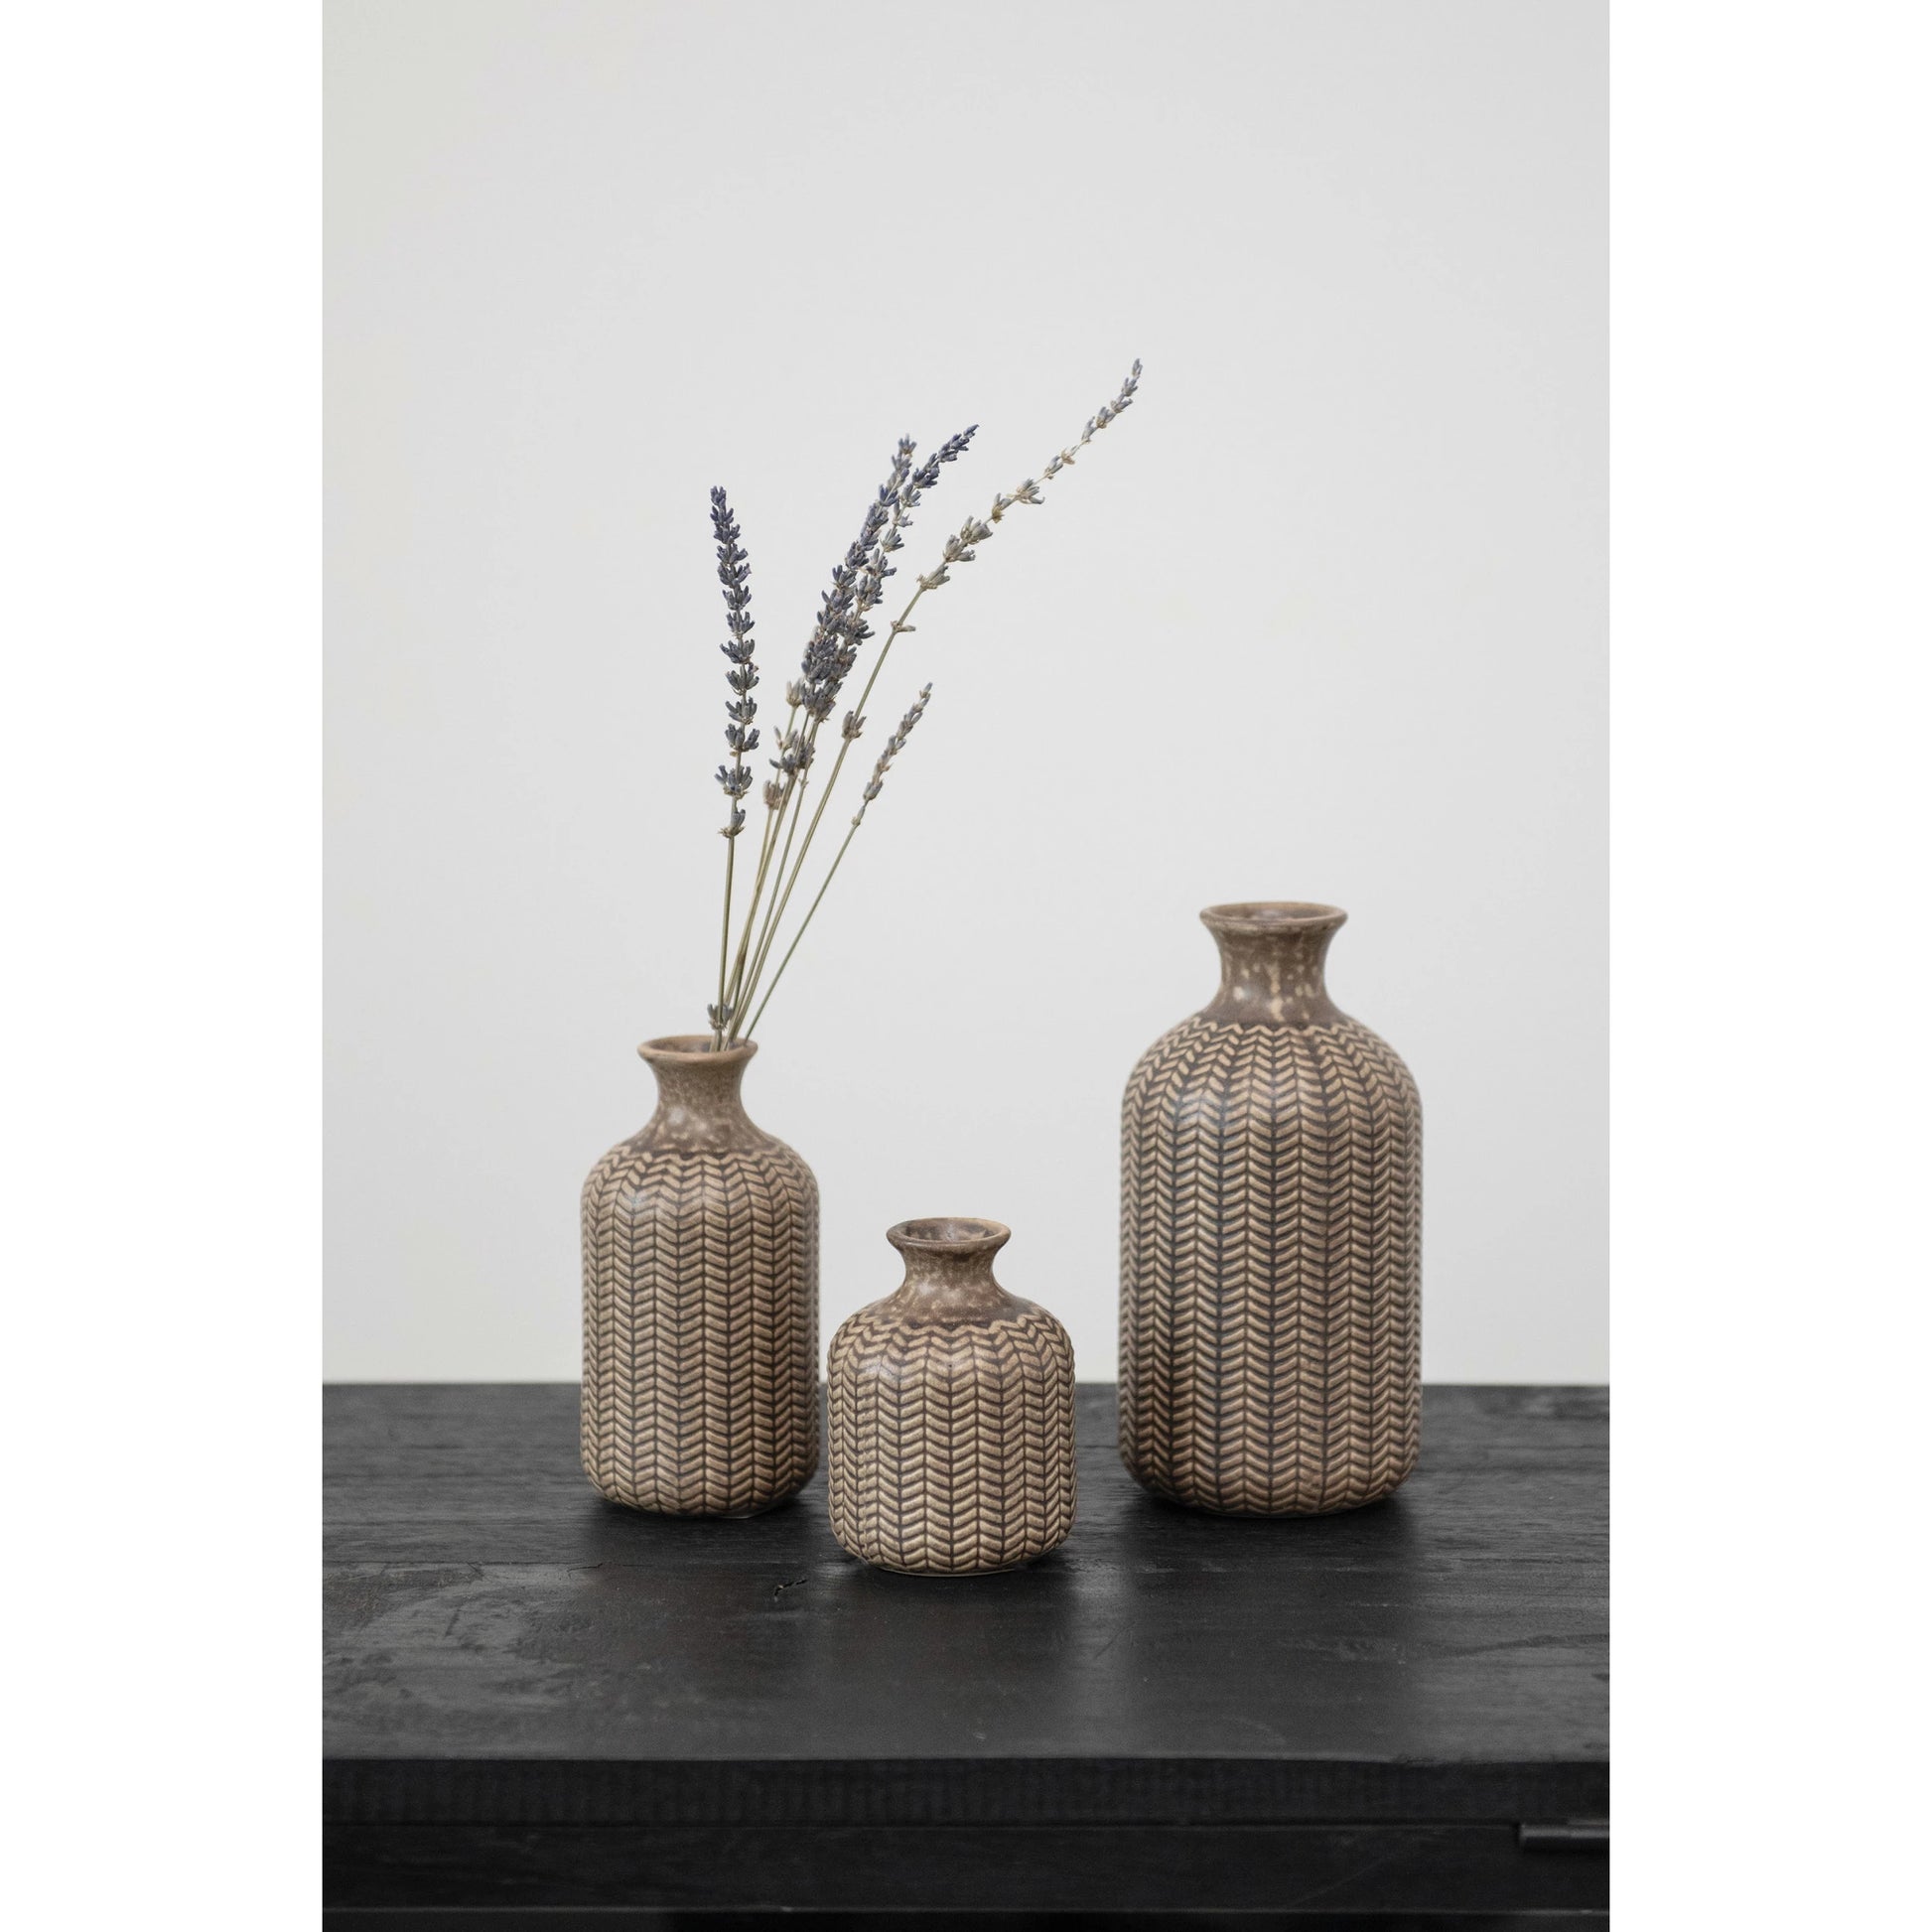 3 sizes of Embossed Stoneware Vases arranged on a black table, one vase has dried lavender in it.